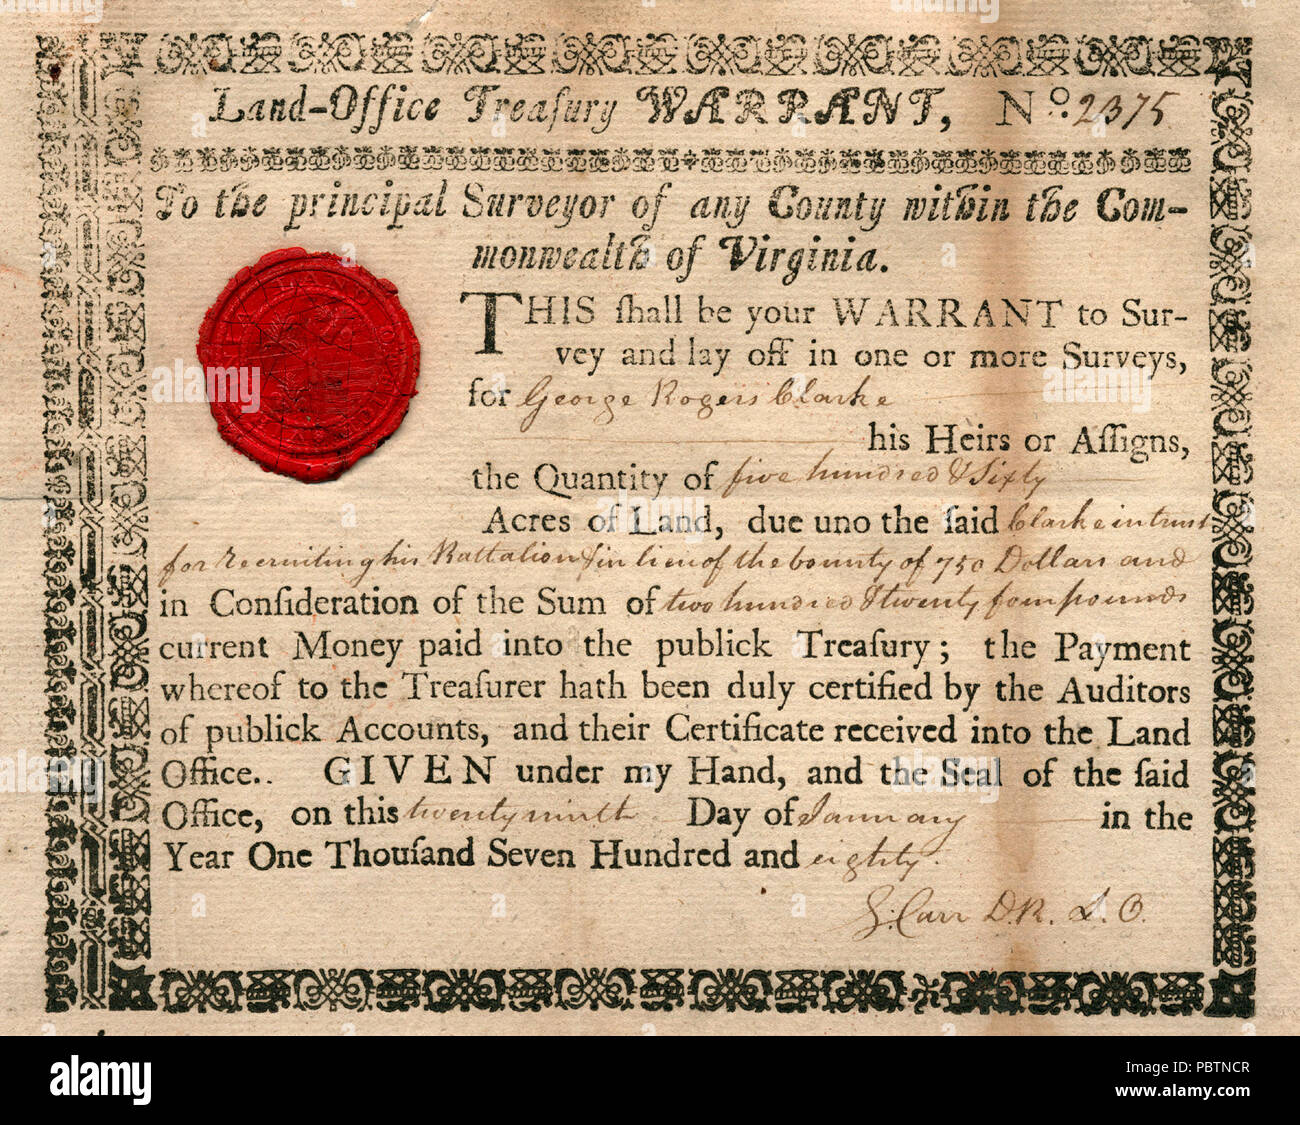 Land Office Treasury Warrant no. 2375 in the name of George Rogers Clark directing the principal surveyor of any Virginia county to lay off one or more surveys totaling 560 acres. The state of Virginia owed Clark acreage for recruiting a battalion and in lieu of a $750 bounty. Stock Photo